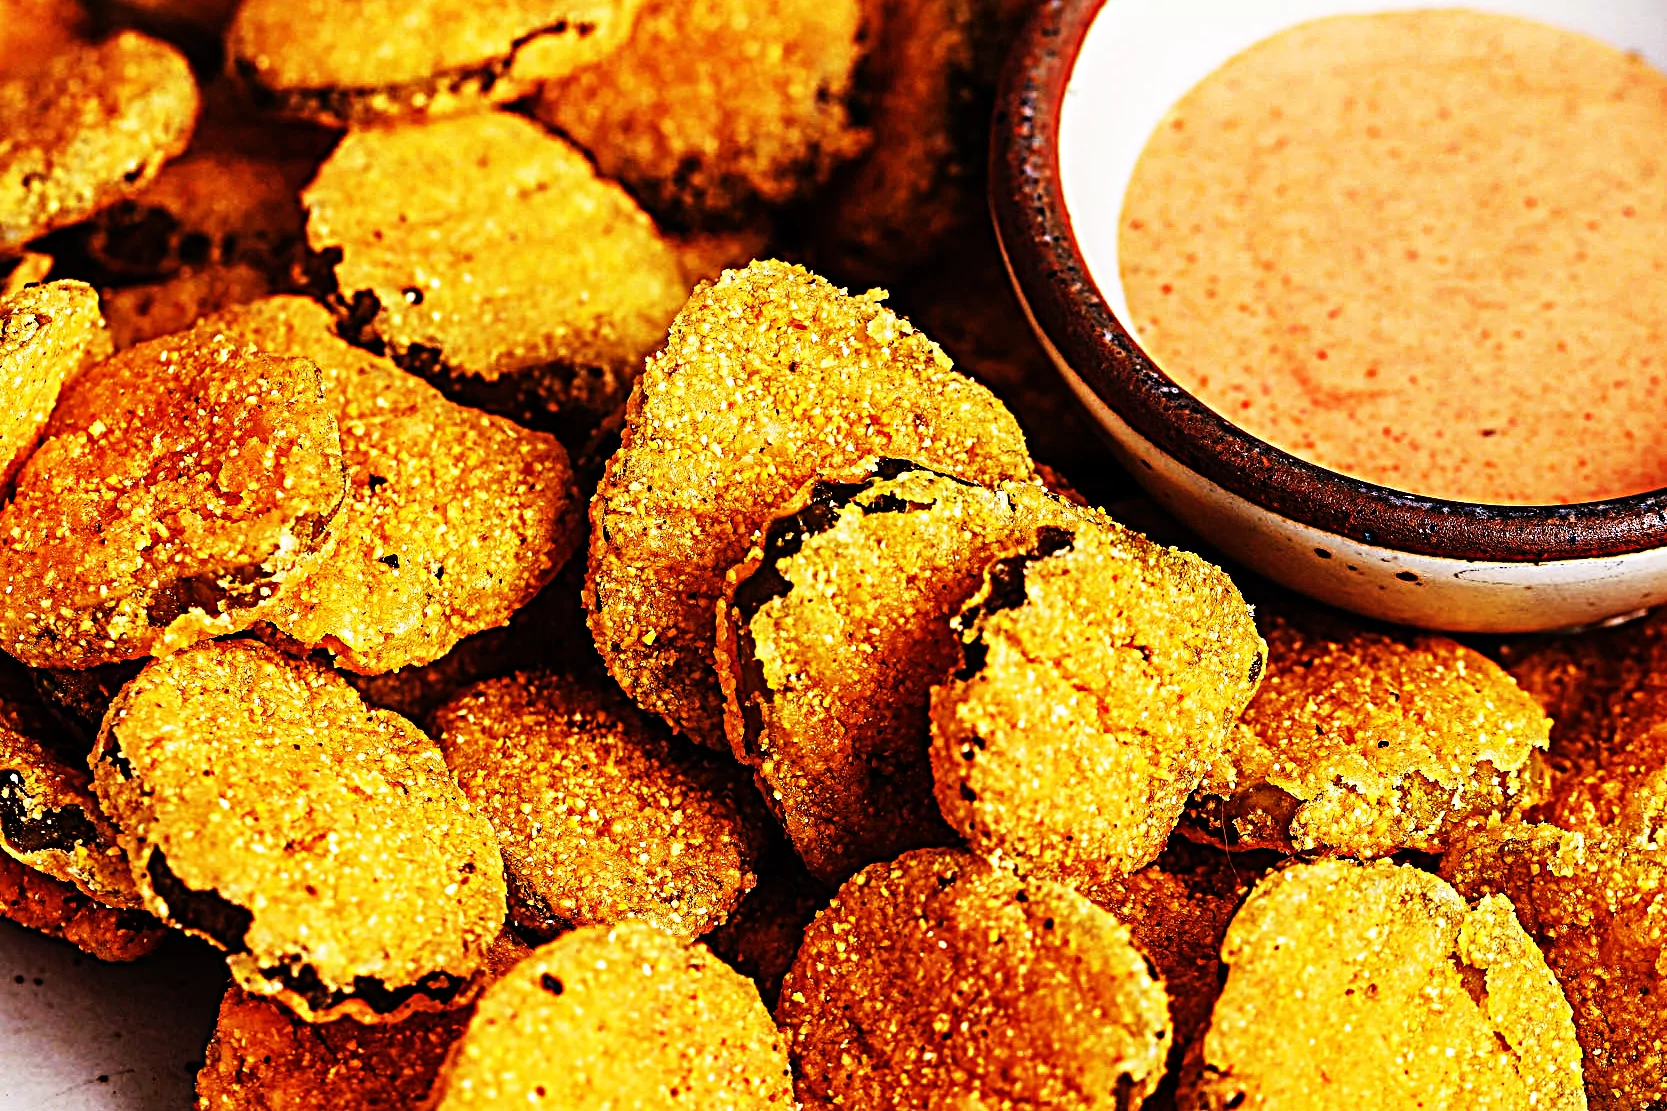 Stupid-Easy Recipe for Fried Pickles (#1 Top-Rated)